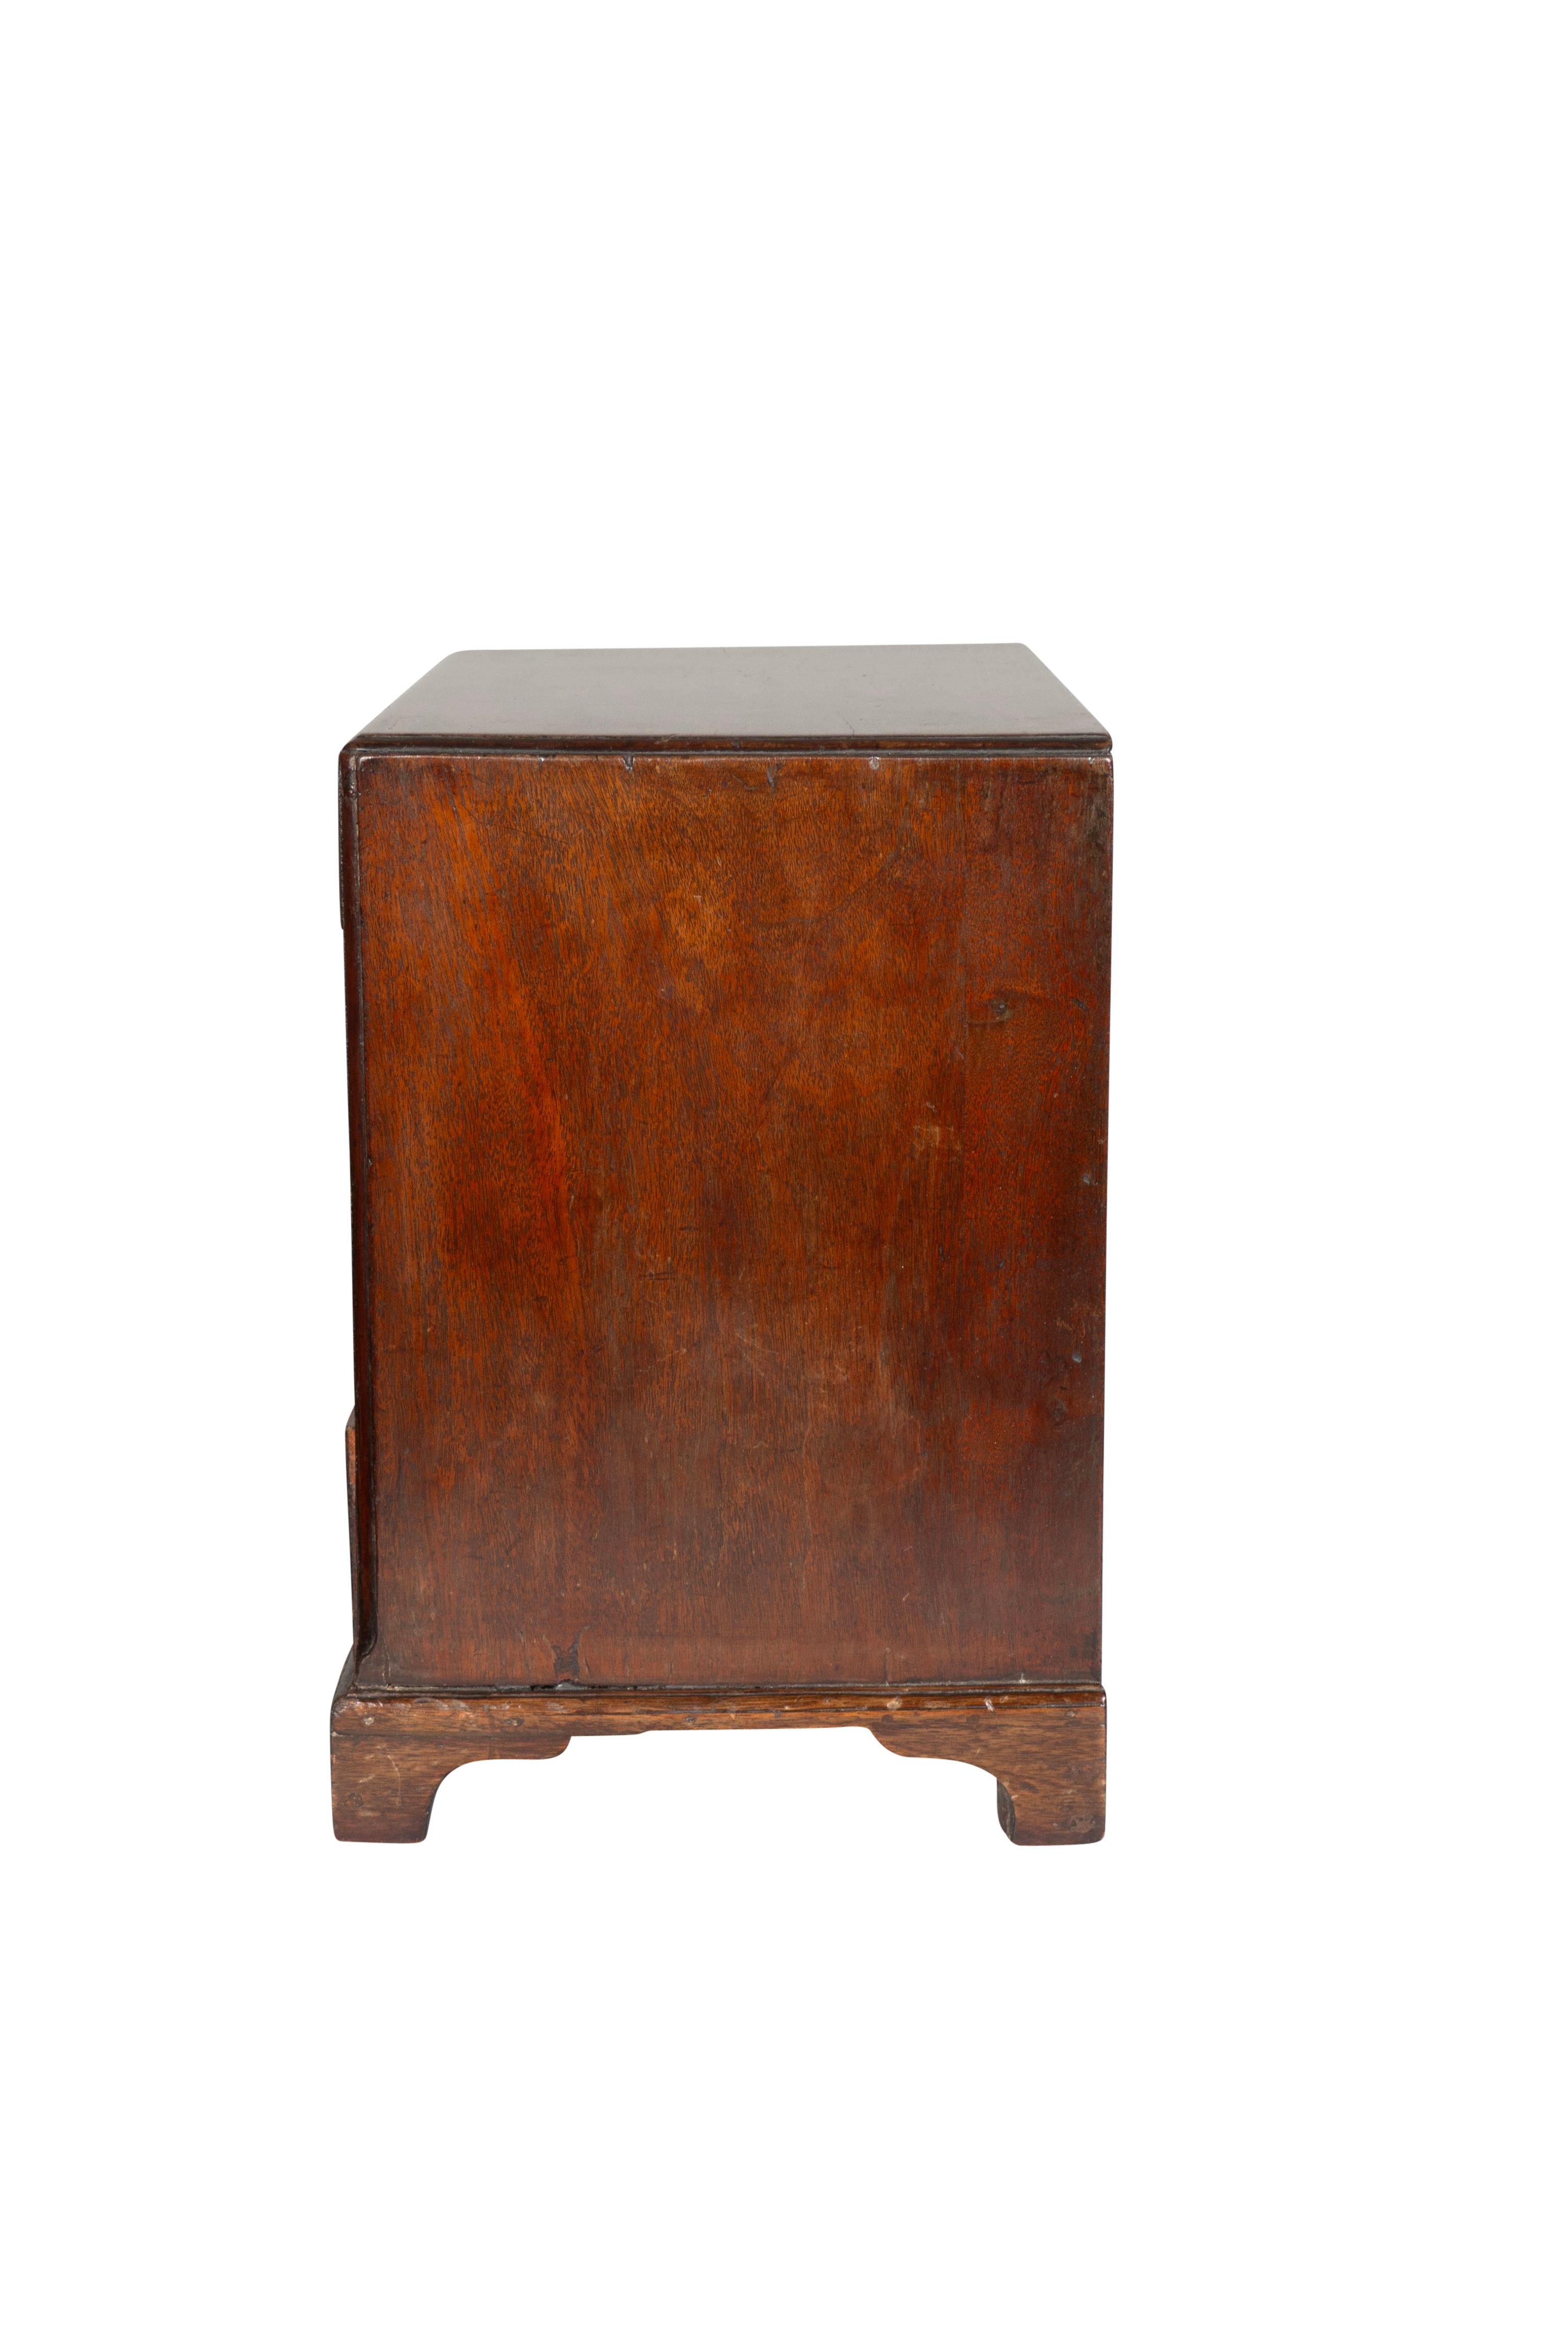 Late 18th Century George III Mahogany Miniature Chest Of Drawers For Sale